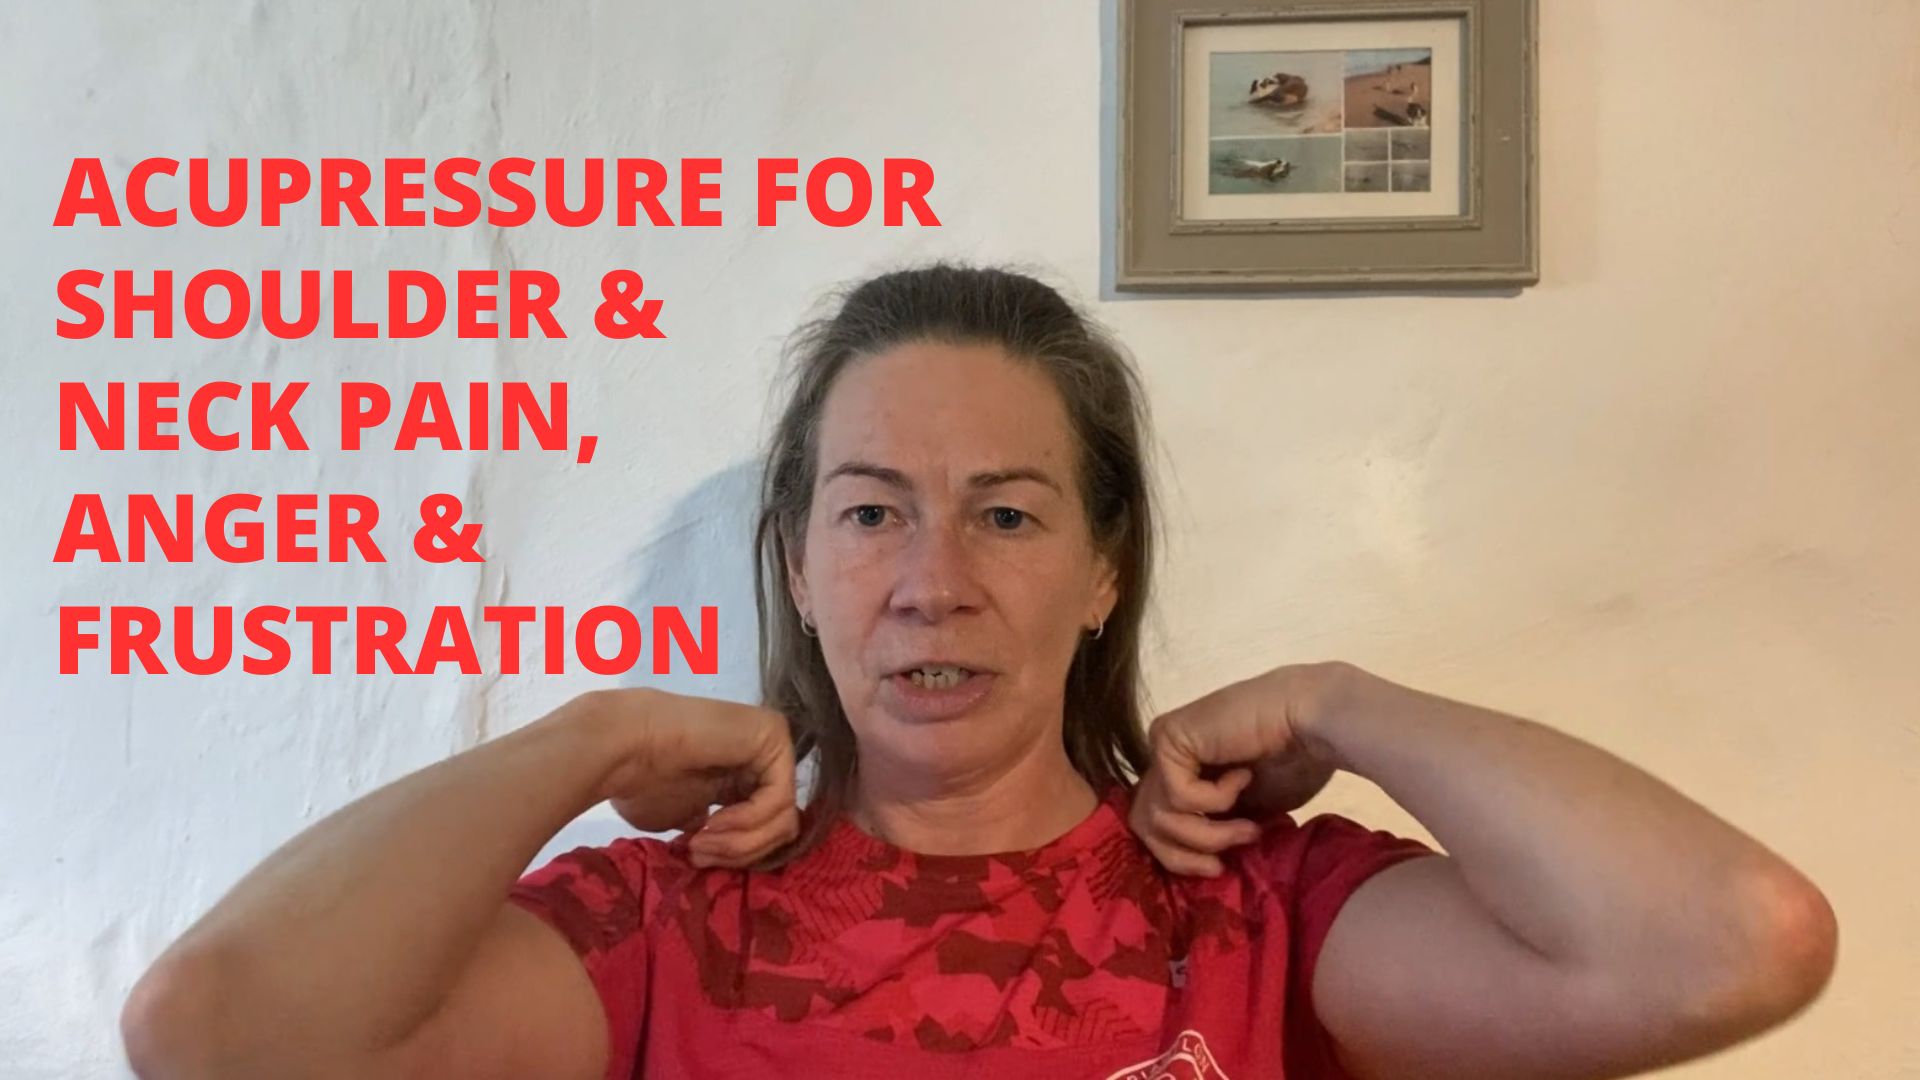 Acupressure For Shoulder and Neck Pain, Anger and Frustration: Jianjing